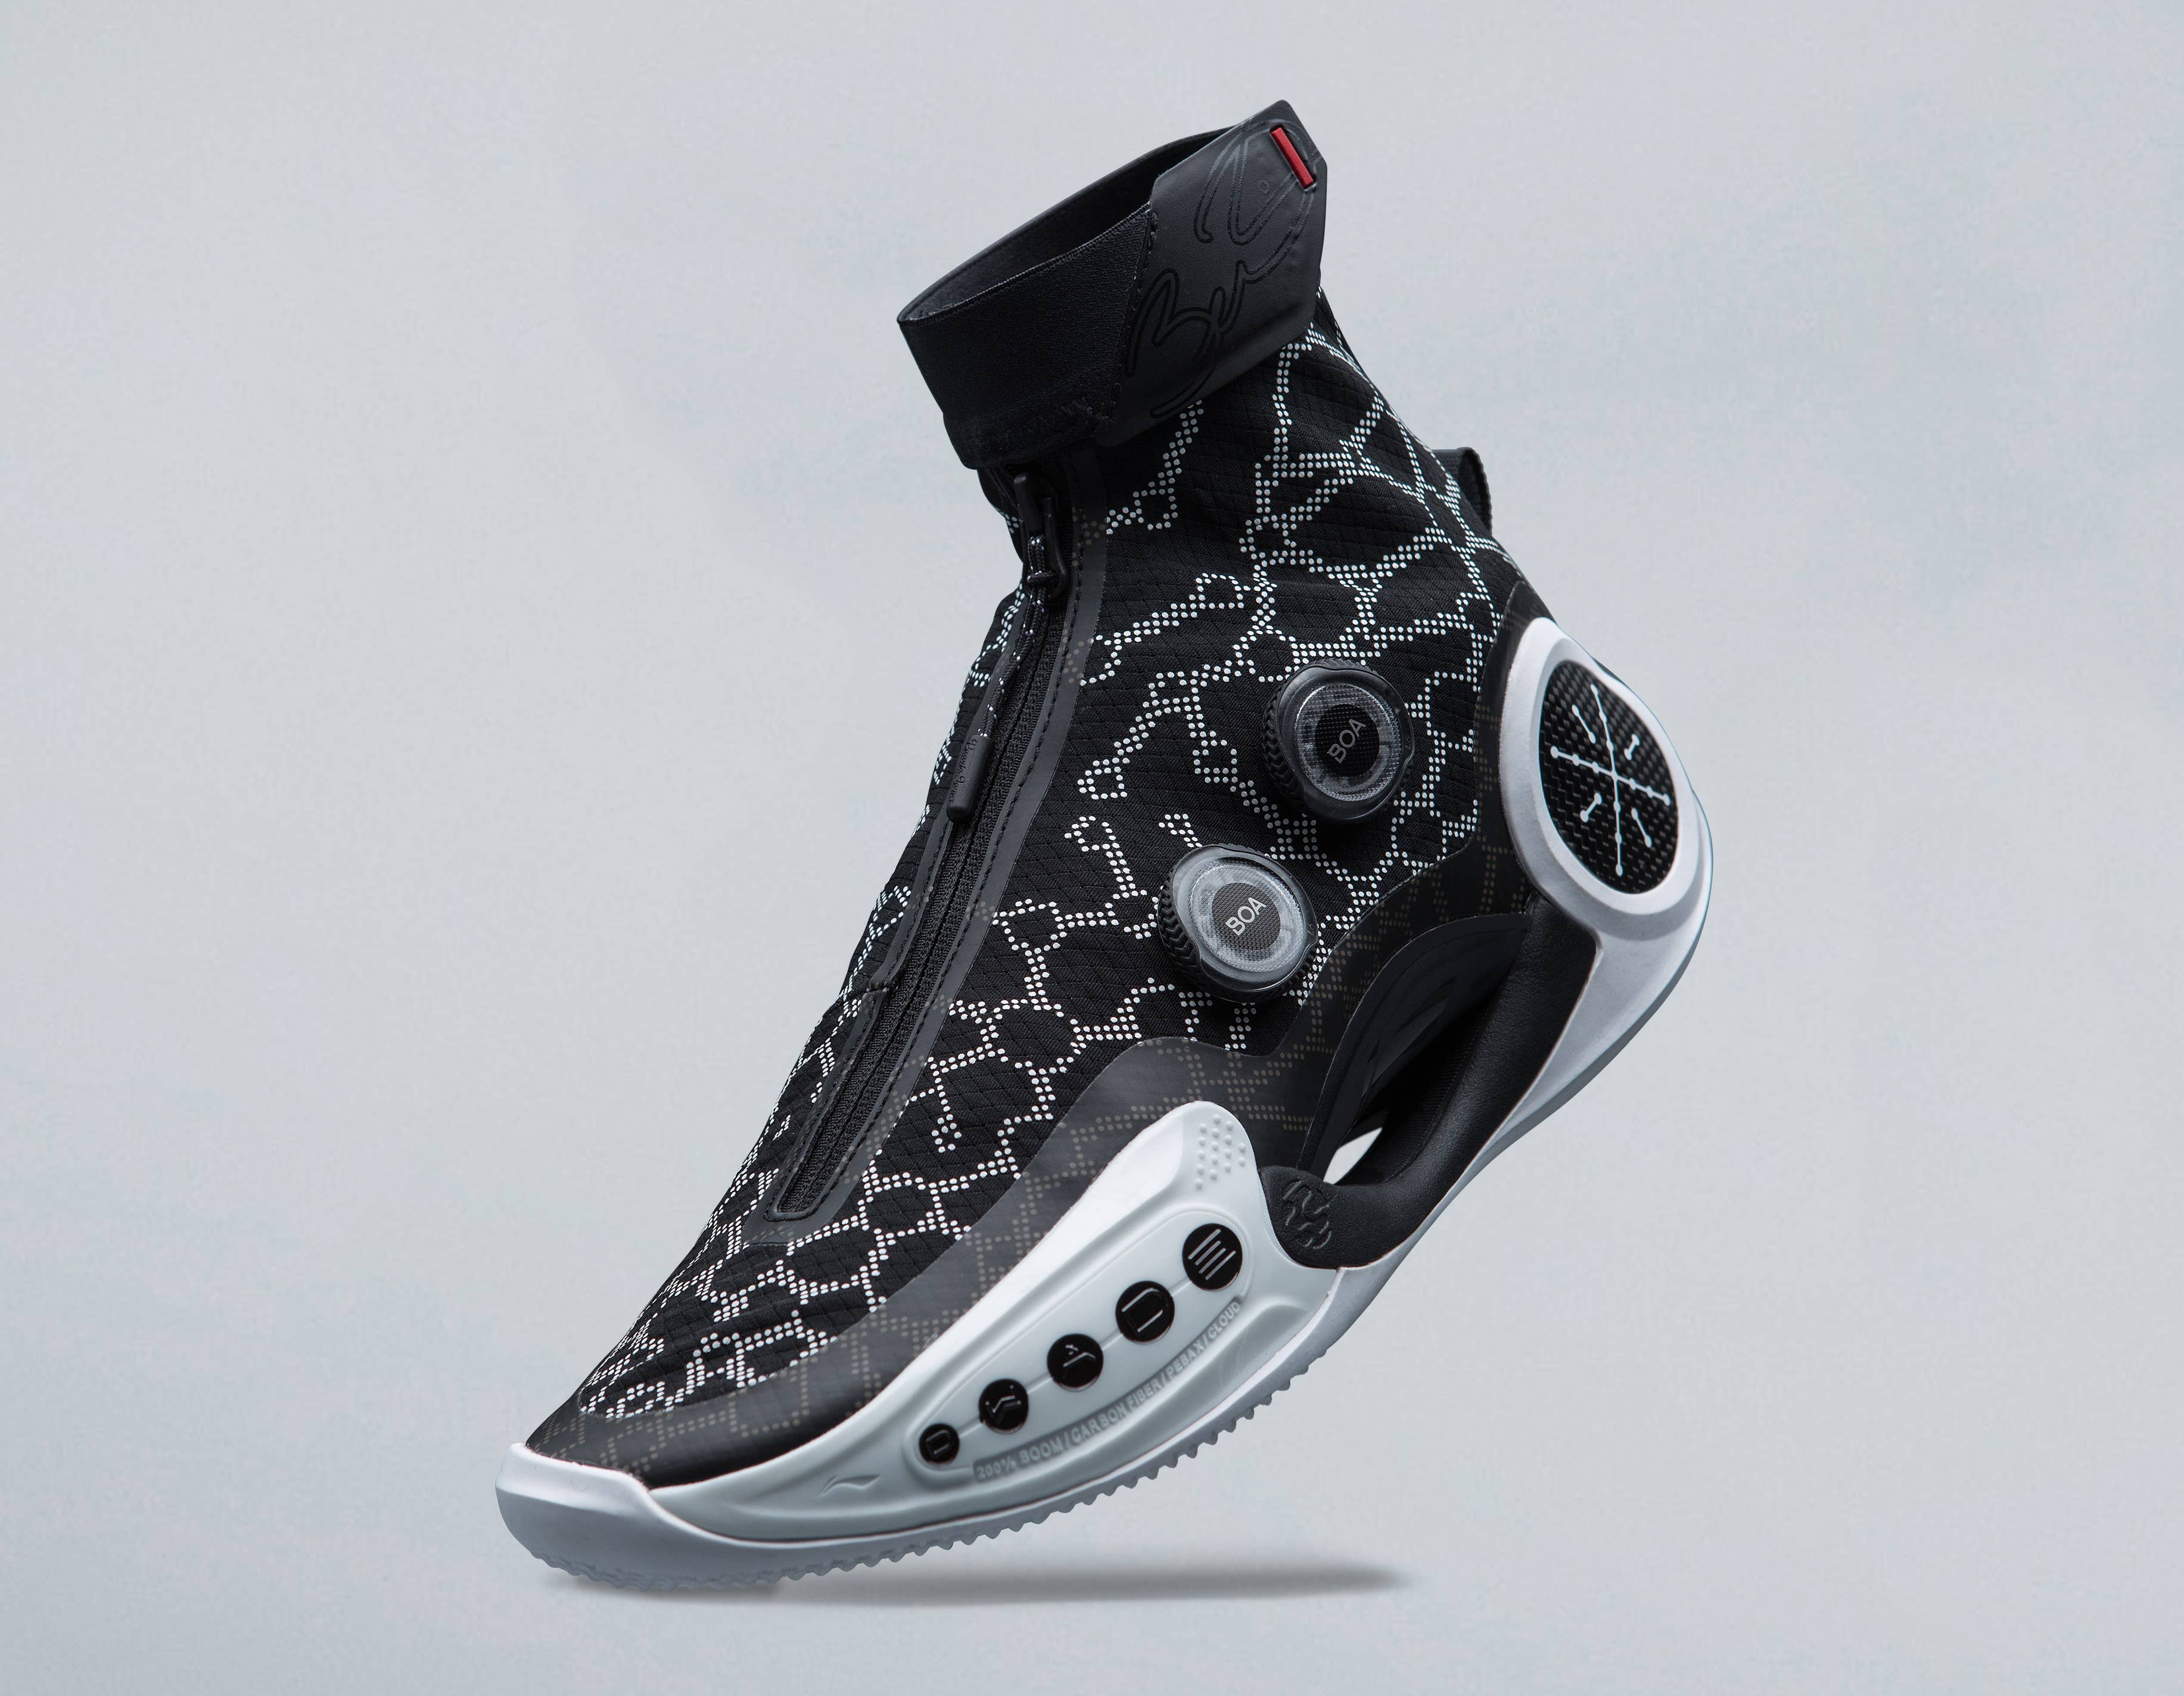 Dwyane Wade's Next Signature Shoe With Li-Ning Is Releasing Soon | Complex